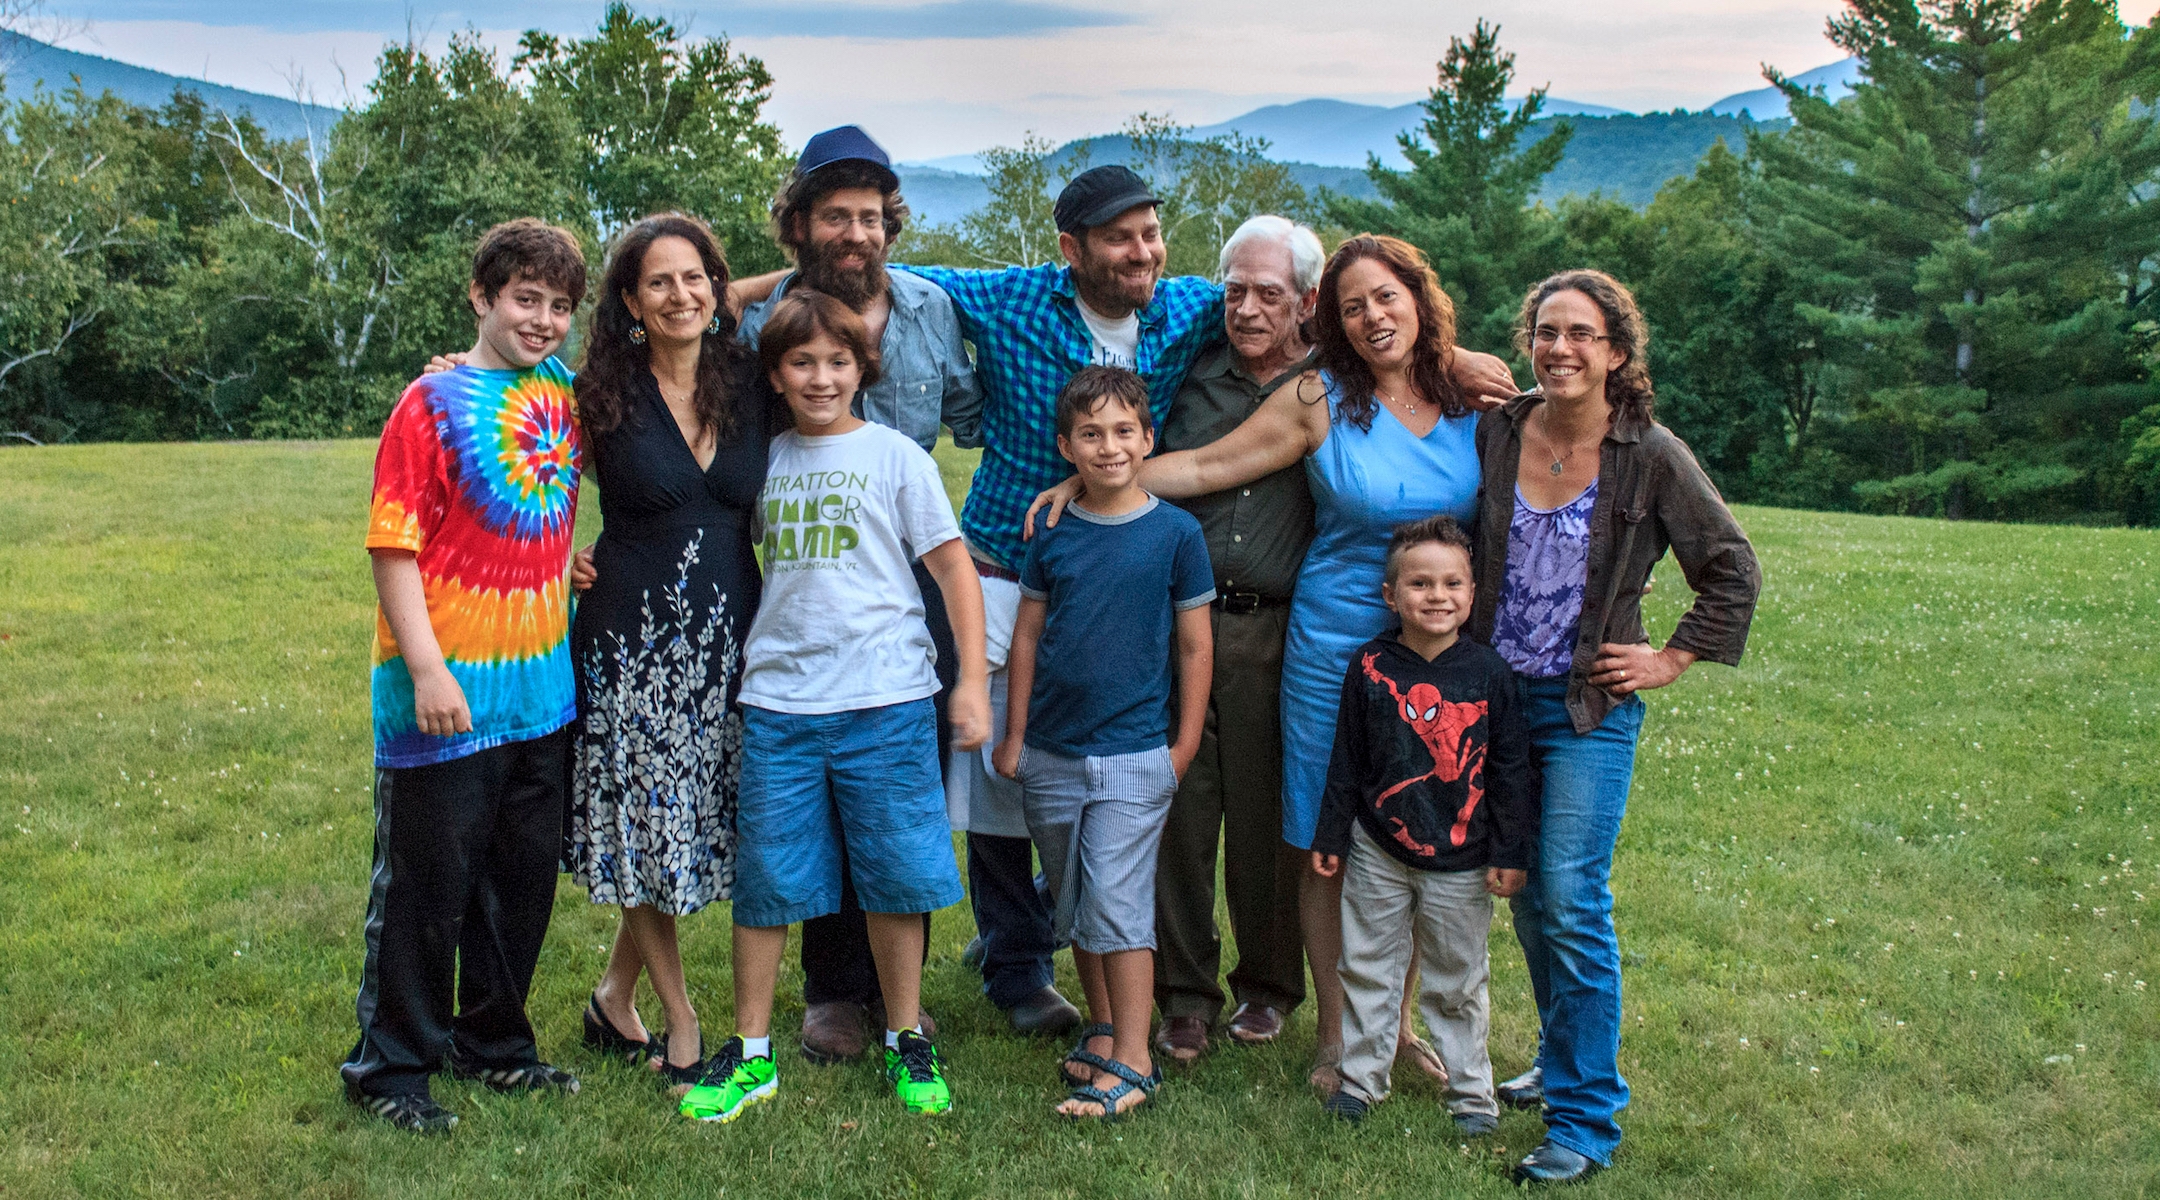 Three generations of a large extended family smile for the camera in rural Vermont